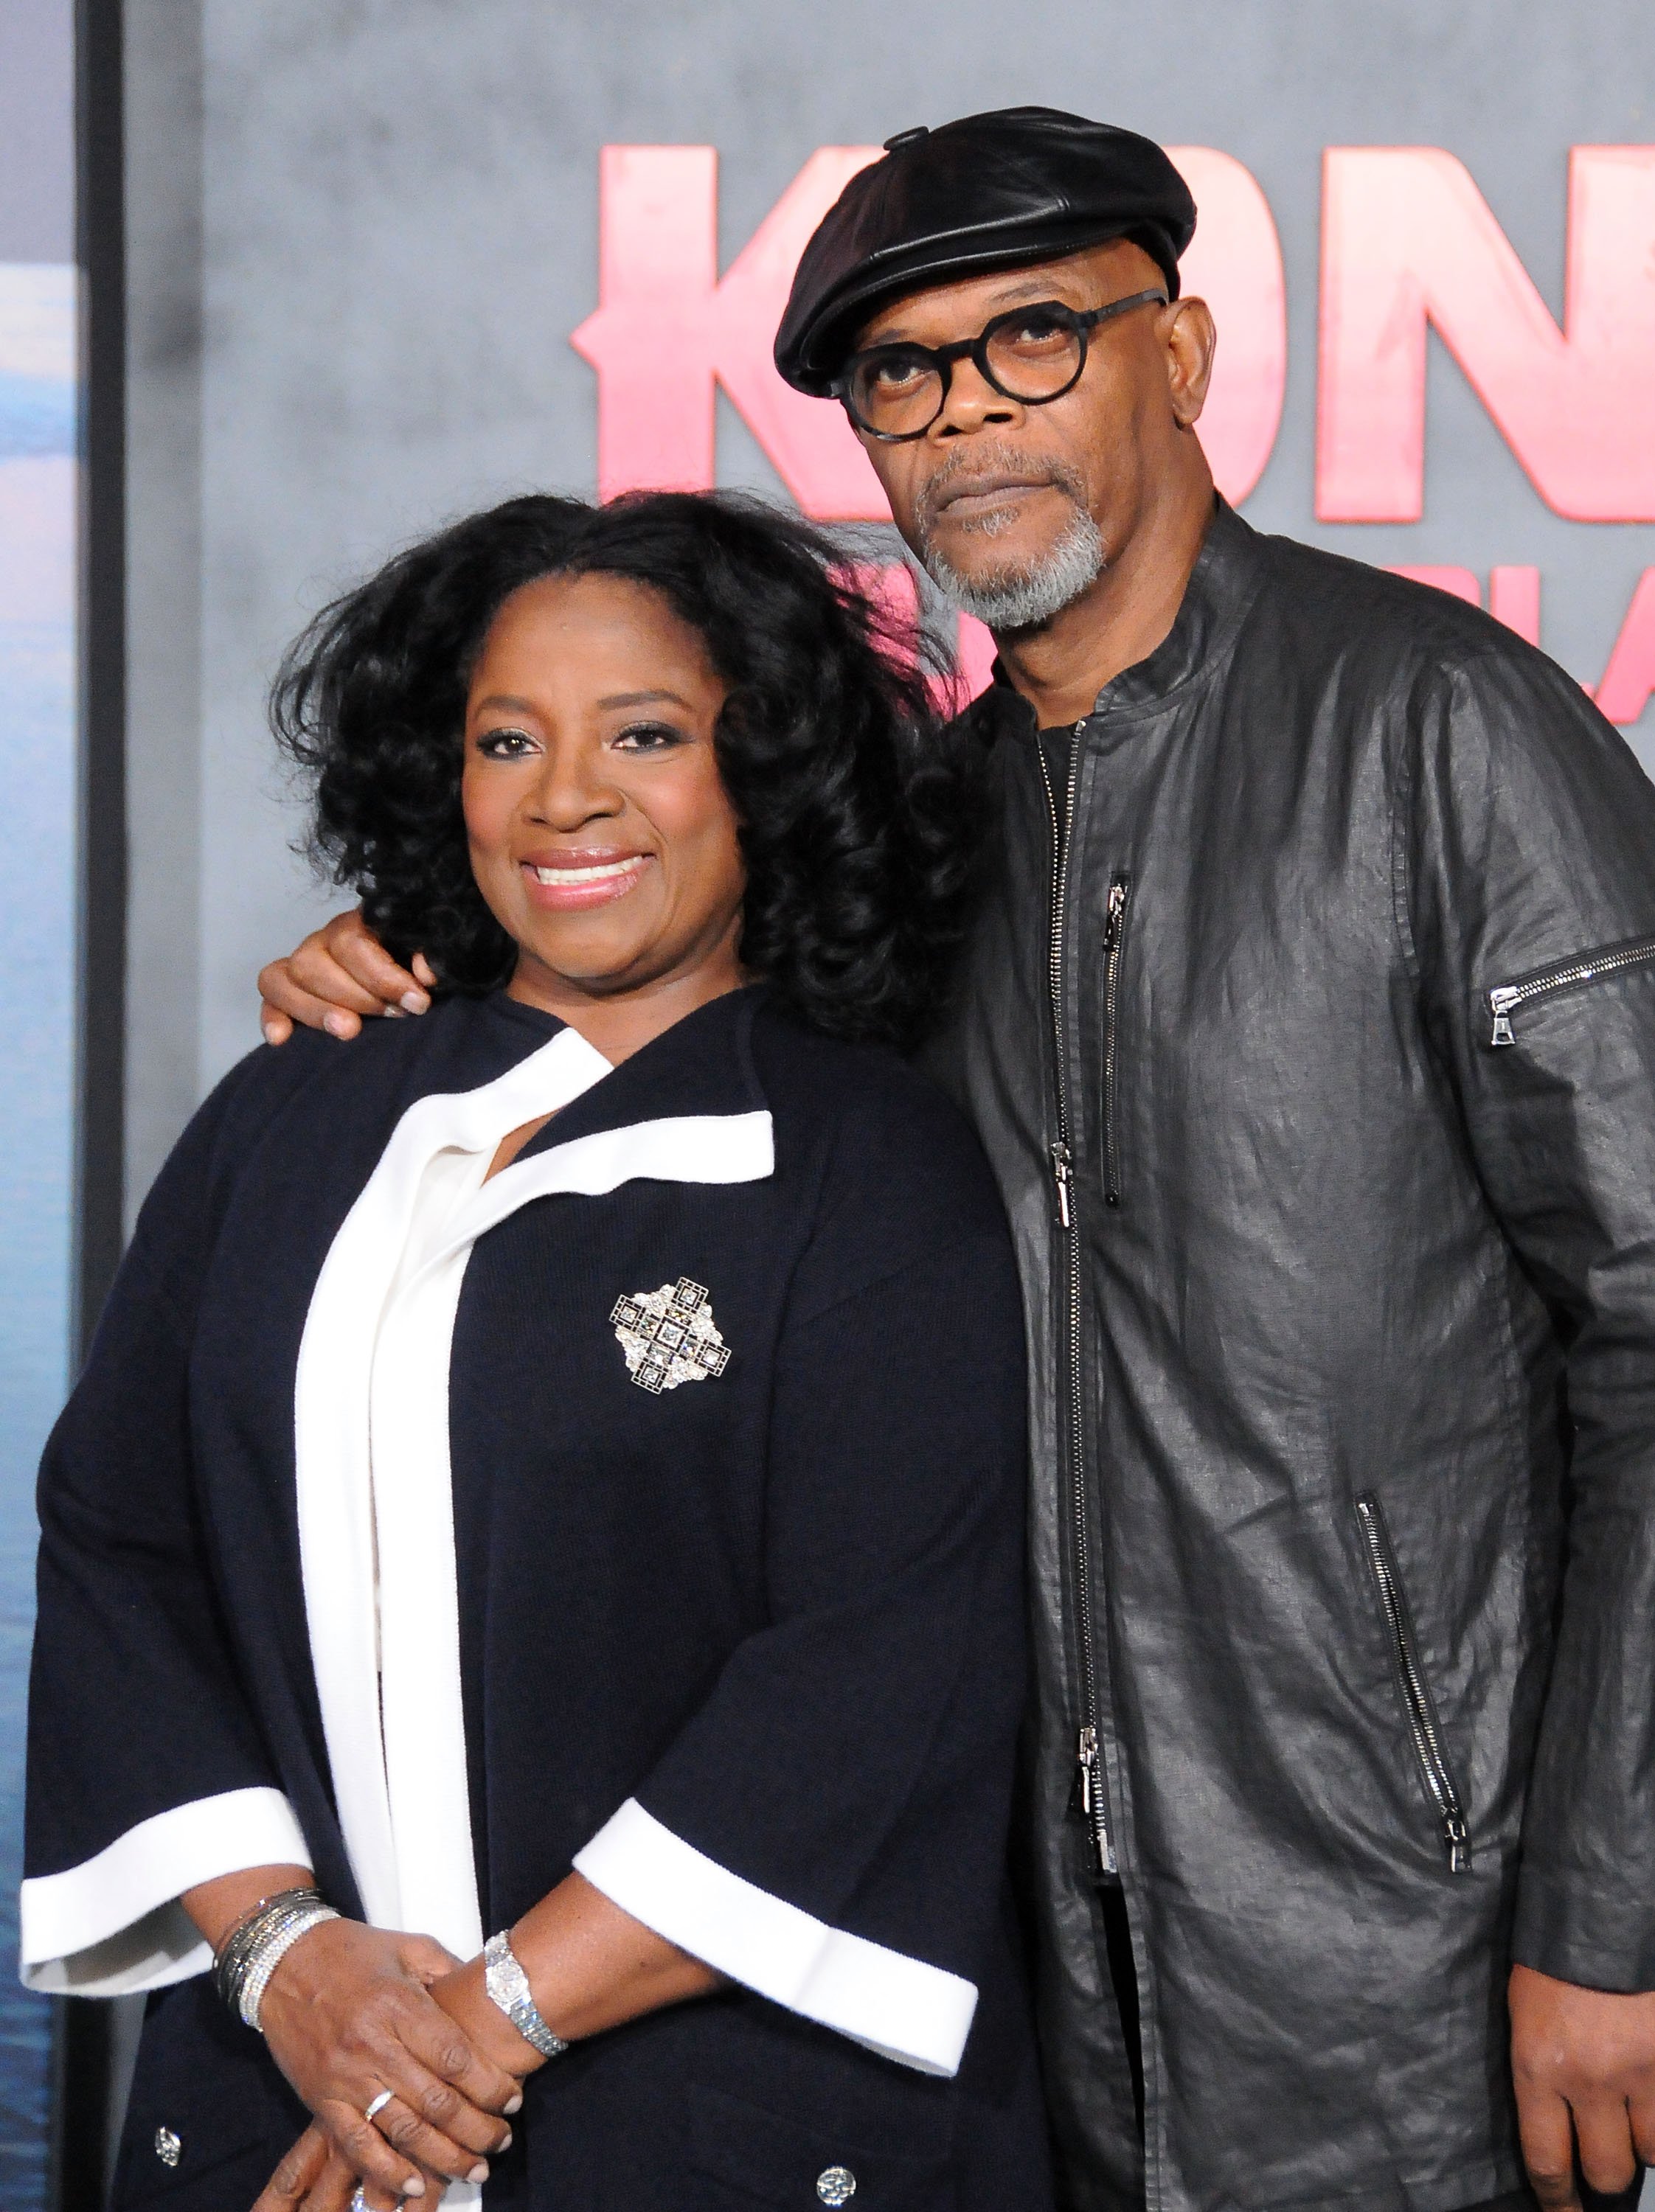 Samuel L. Jackson & LaTanya Richardson at the Premiere of 'Kong: Skull Island' on March 8, 2017 in Hollywood | Photo: Getty Images